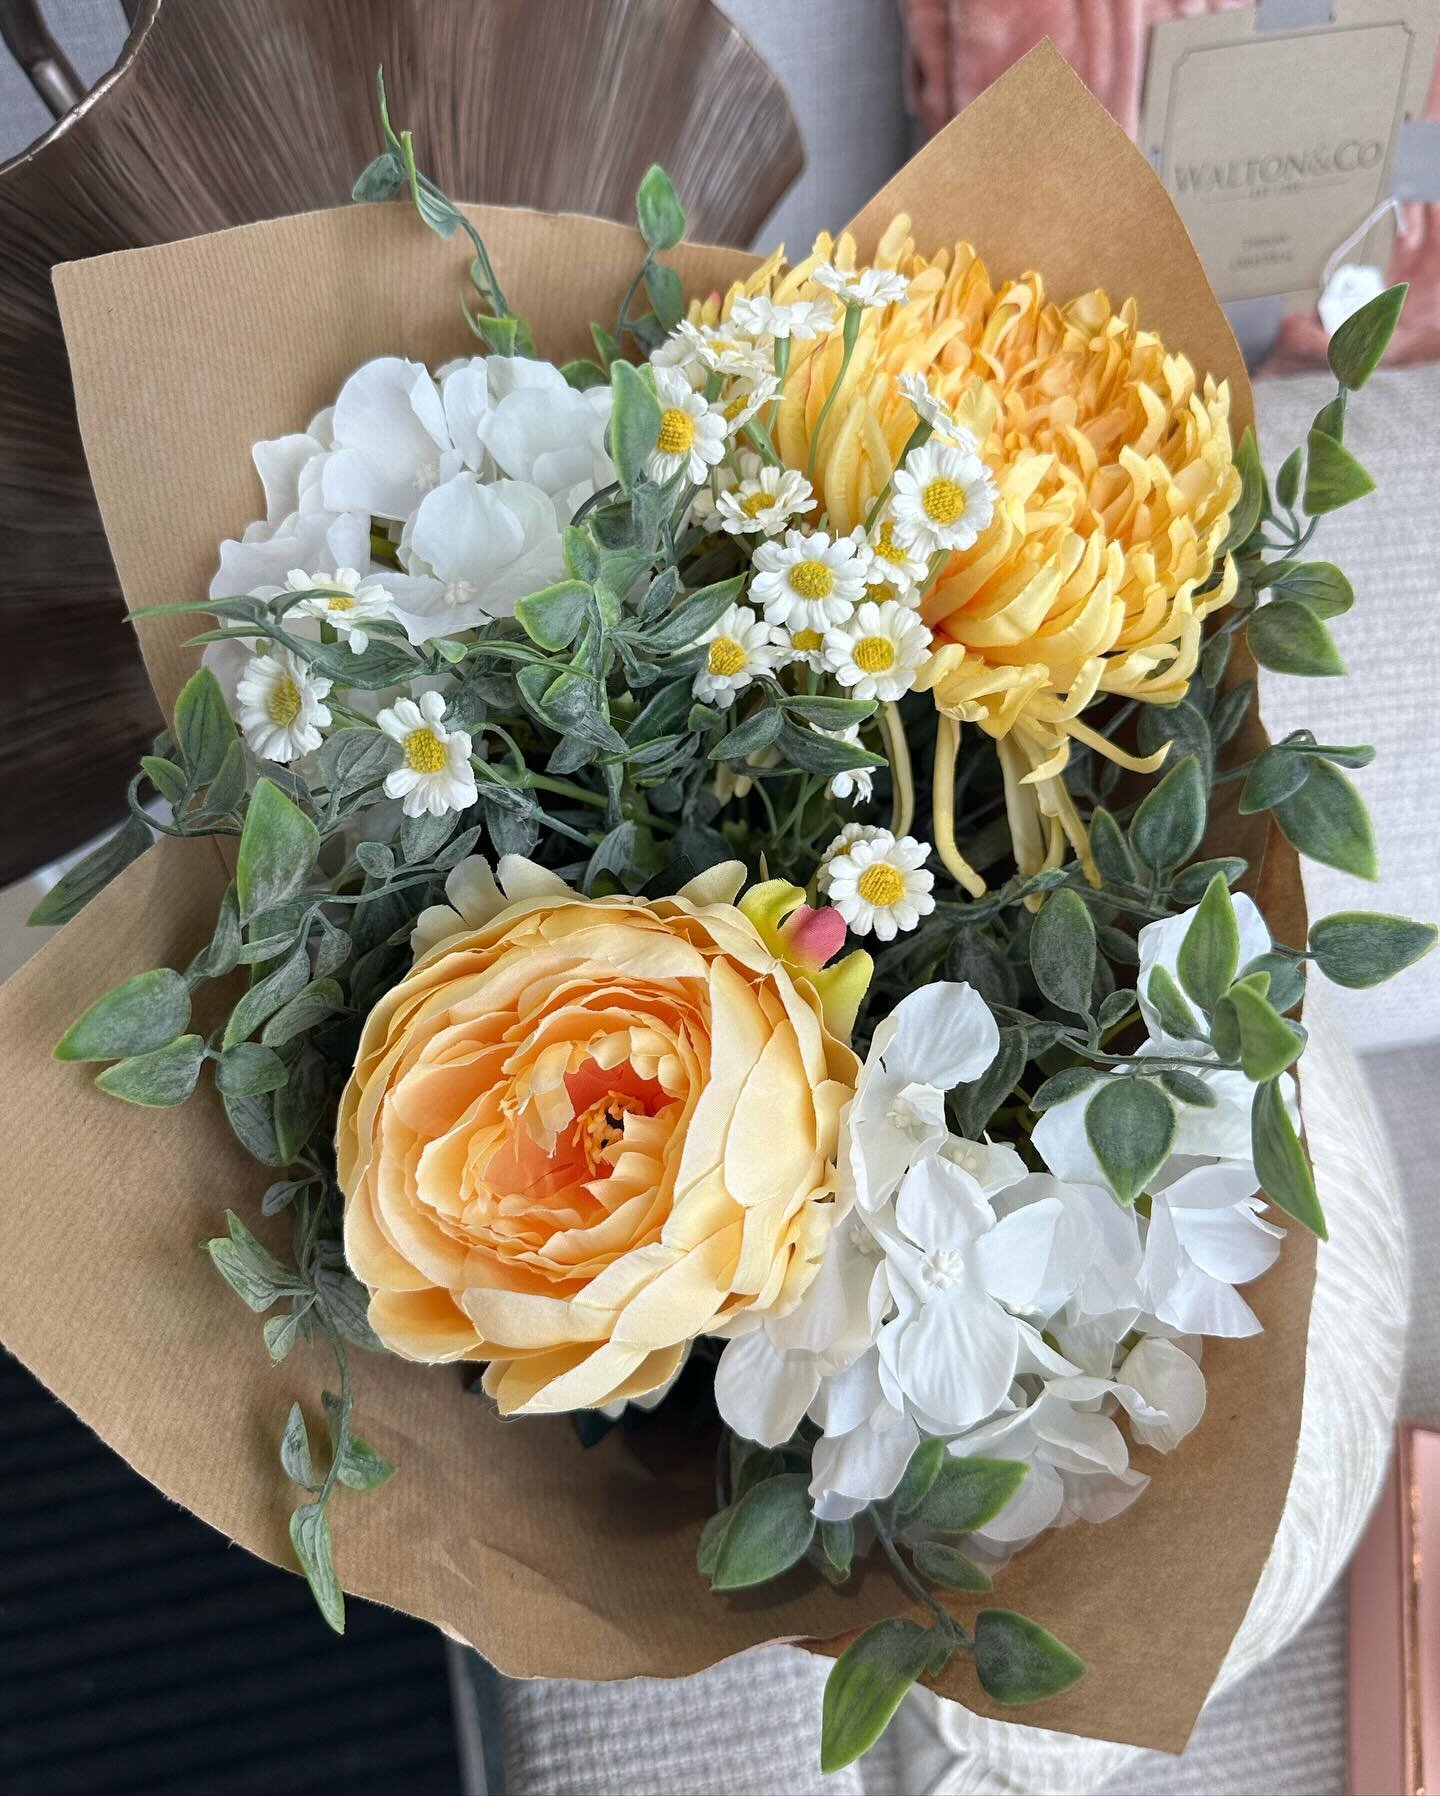 Forever Flowers 💐

Treat a loved one to a bouquet of flowers that they can cherish forever 🤍 &pound;18.50 each

We are open Tuesday - Saturday 9-5pm for collection.